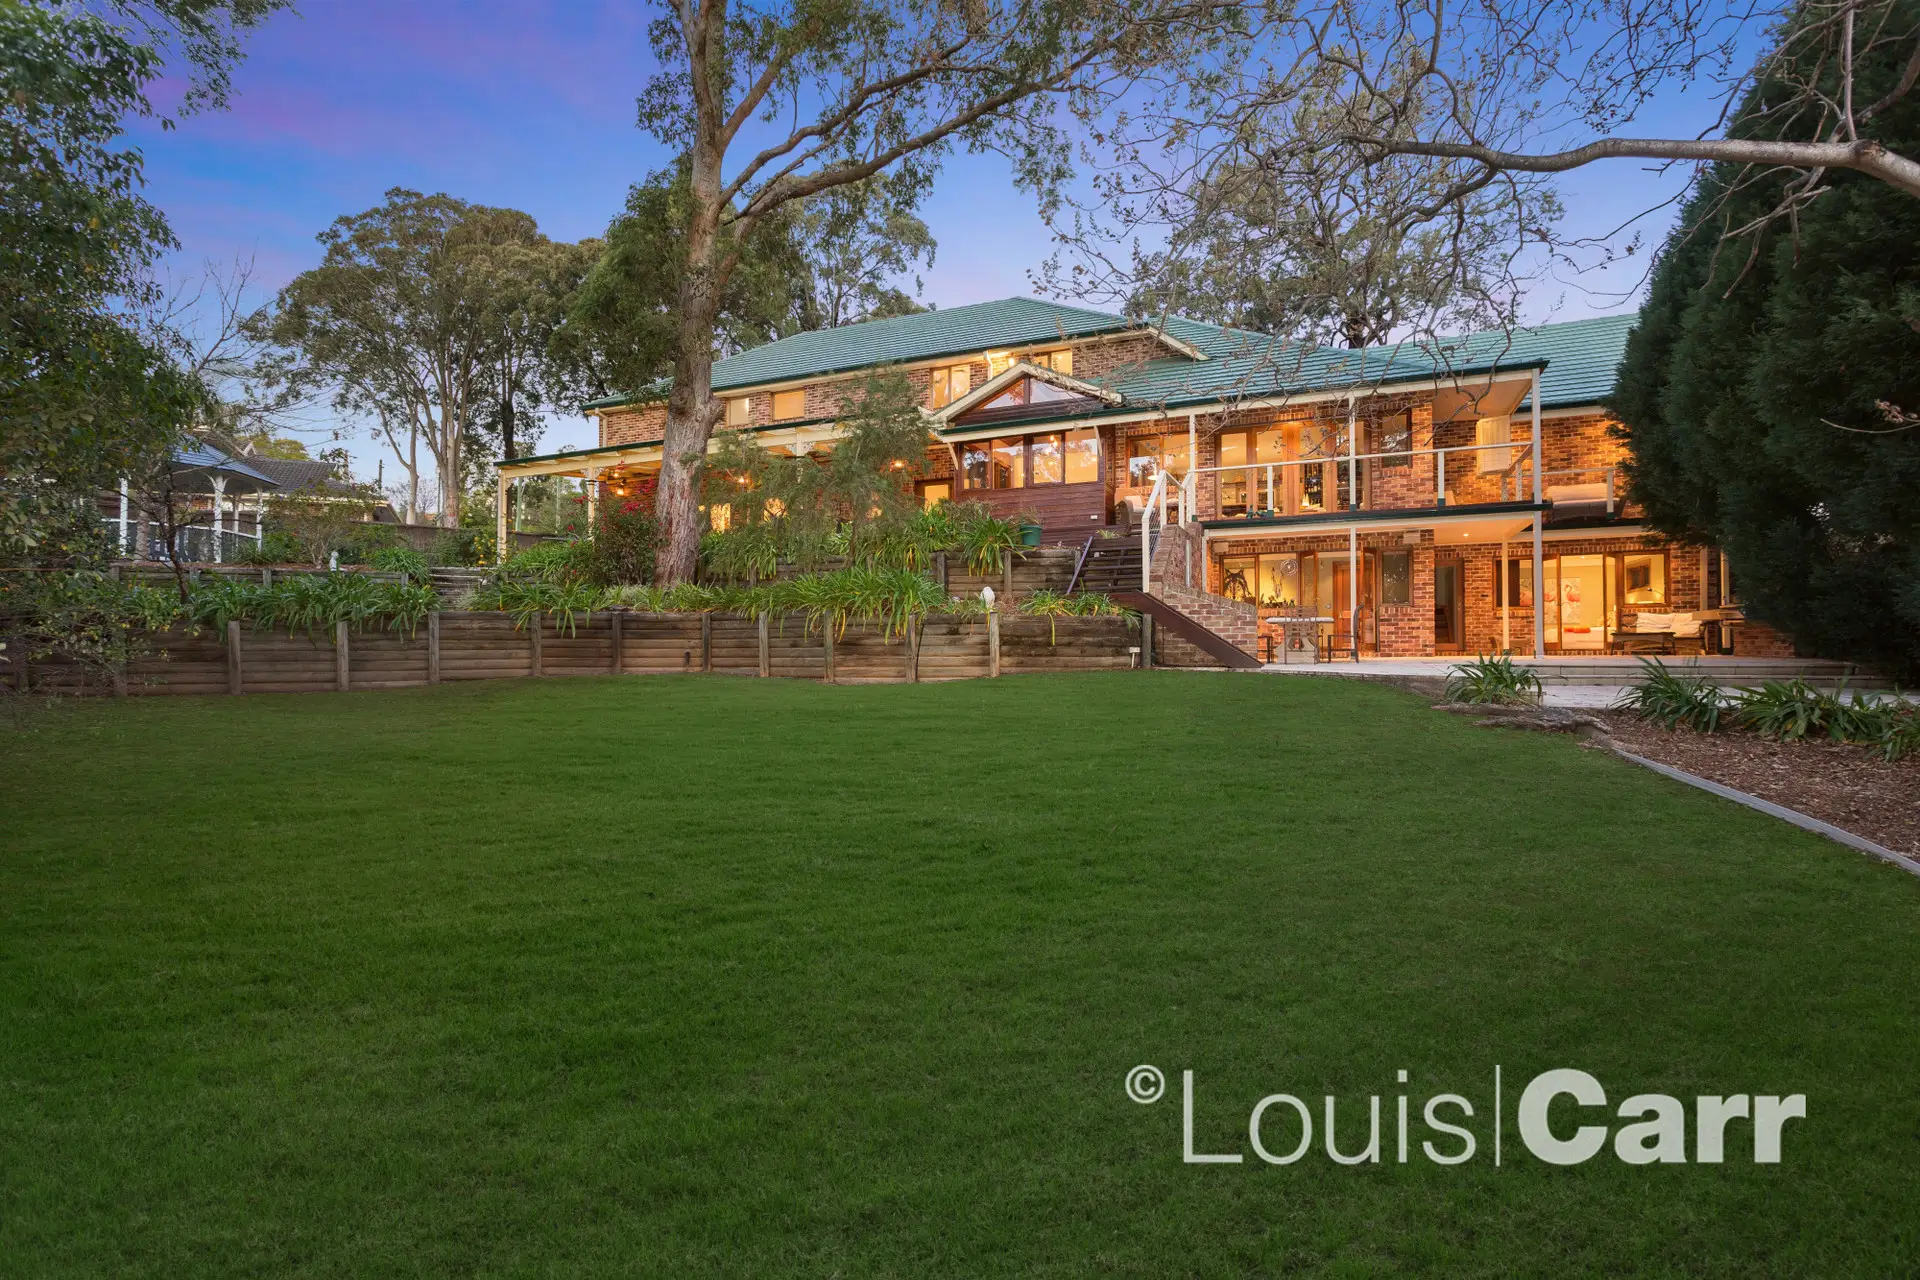 Photo #15: 16 Crego Road, Glenhaven - Sold by Louis Carr Real Estate